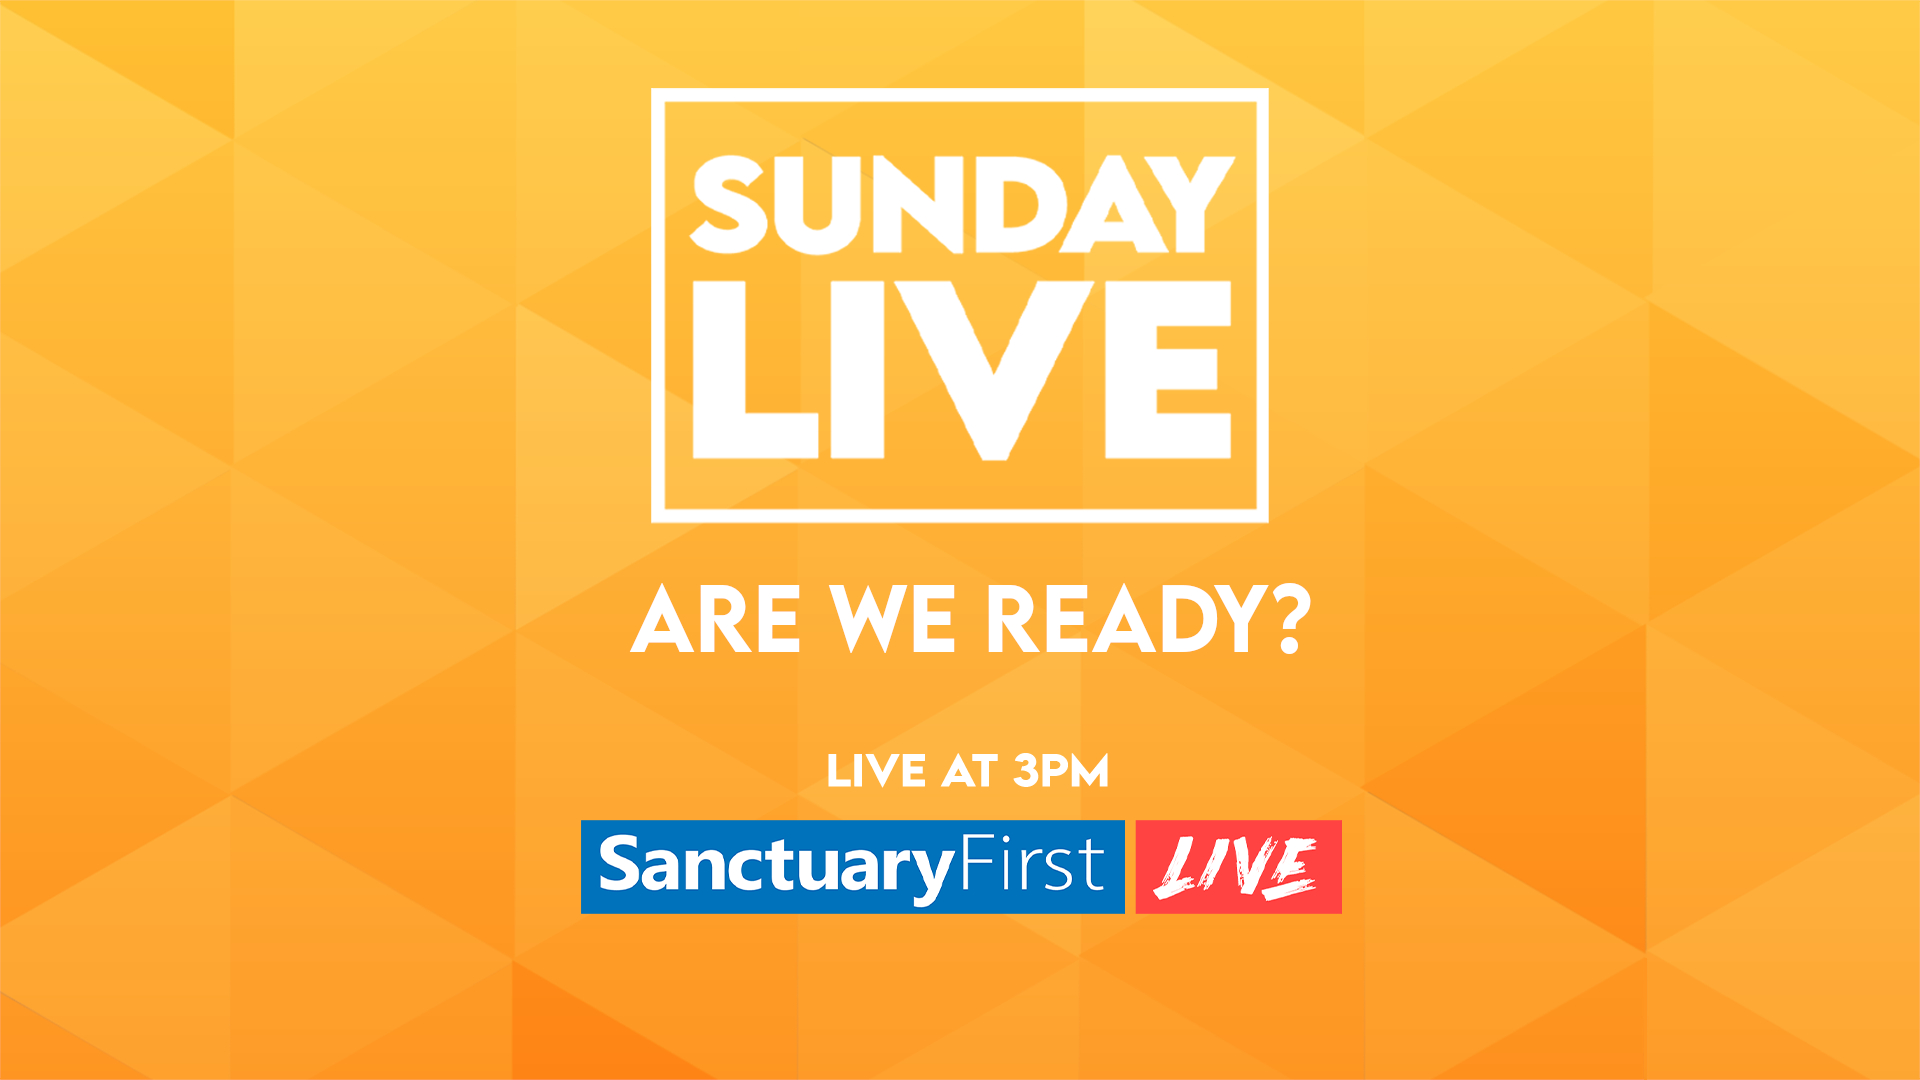 Sunday Live - Are we ready?